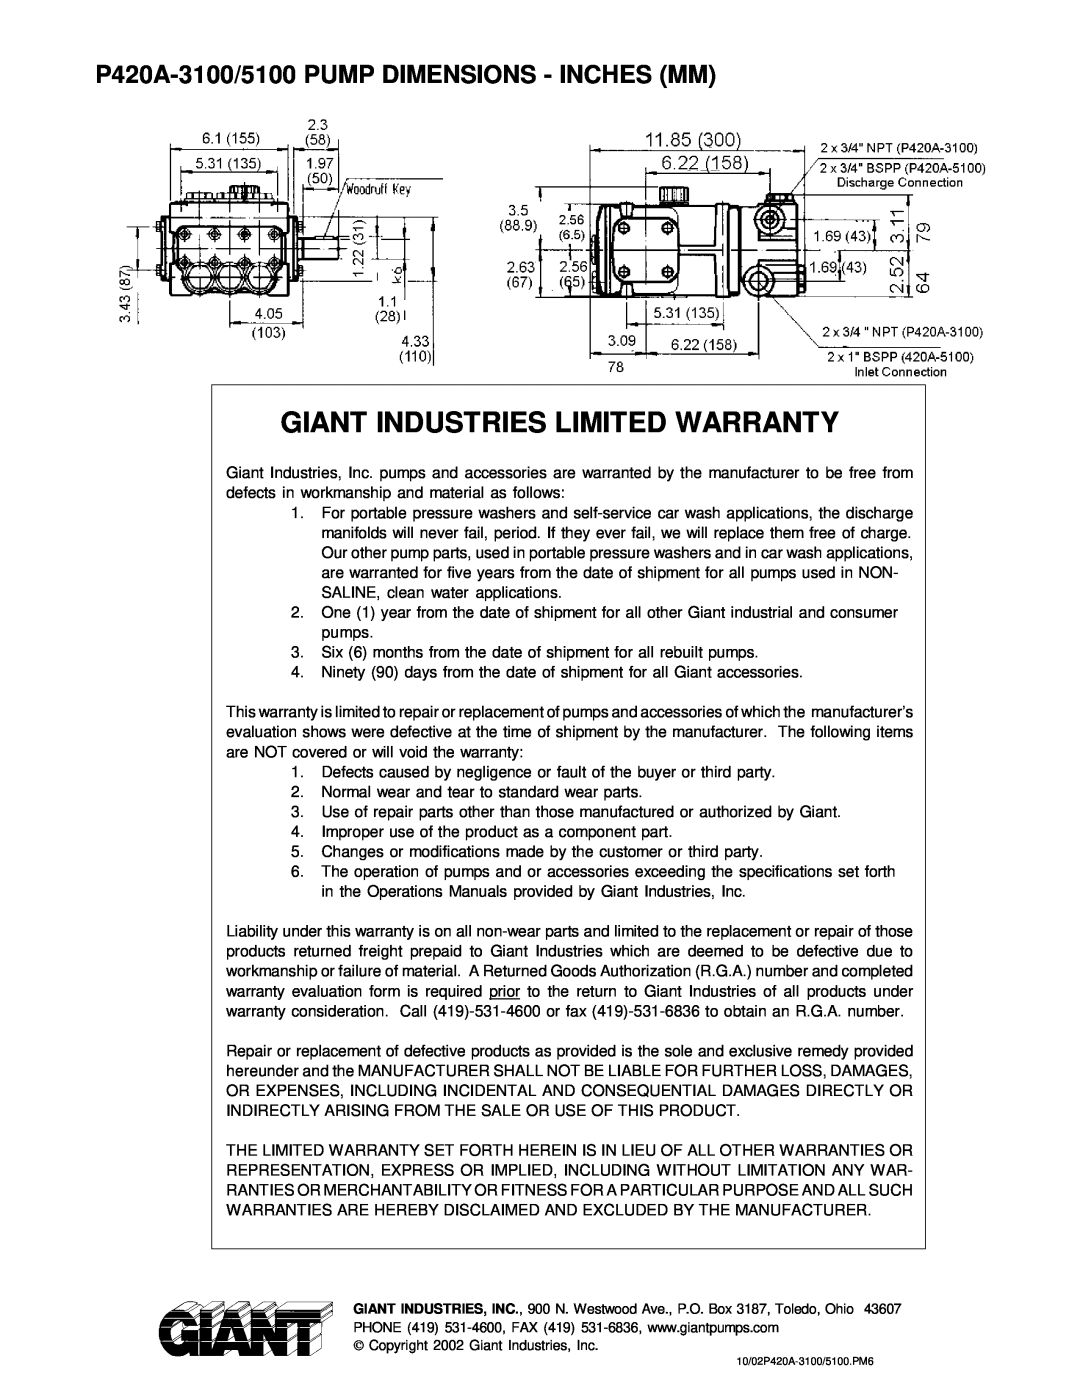 Giant operating instructions P420A-3100/5100 PUMP DIMENSIONS - INCHES MM, Giant Industries Limited Warranty 